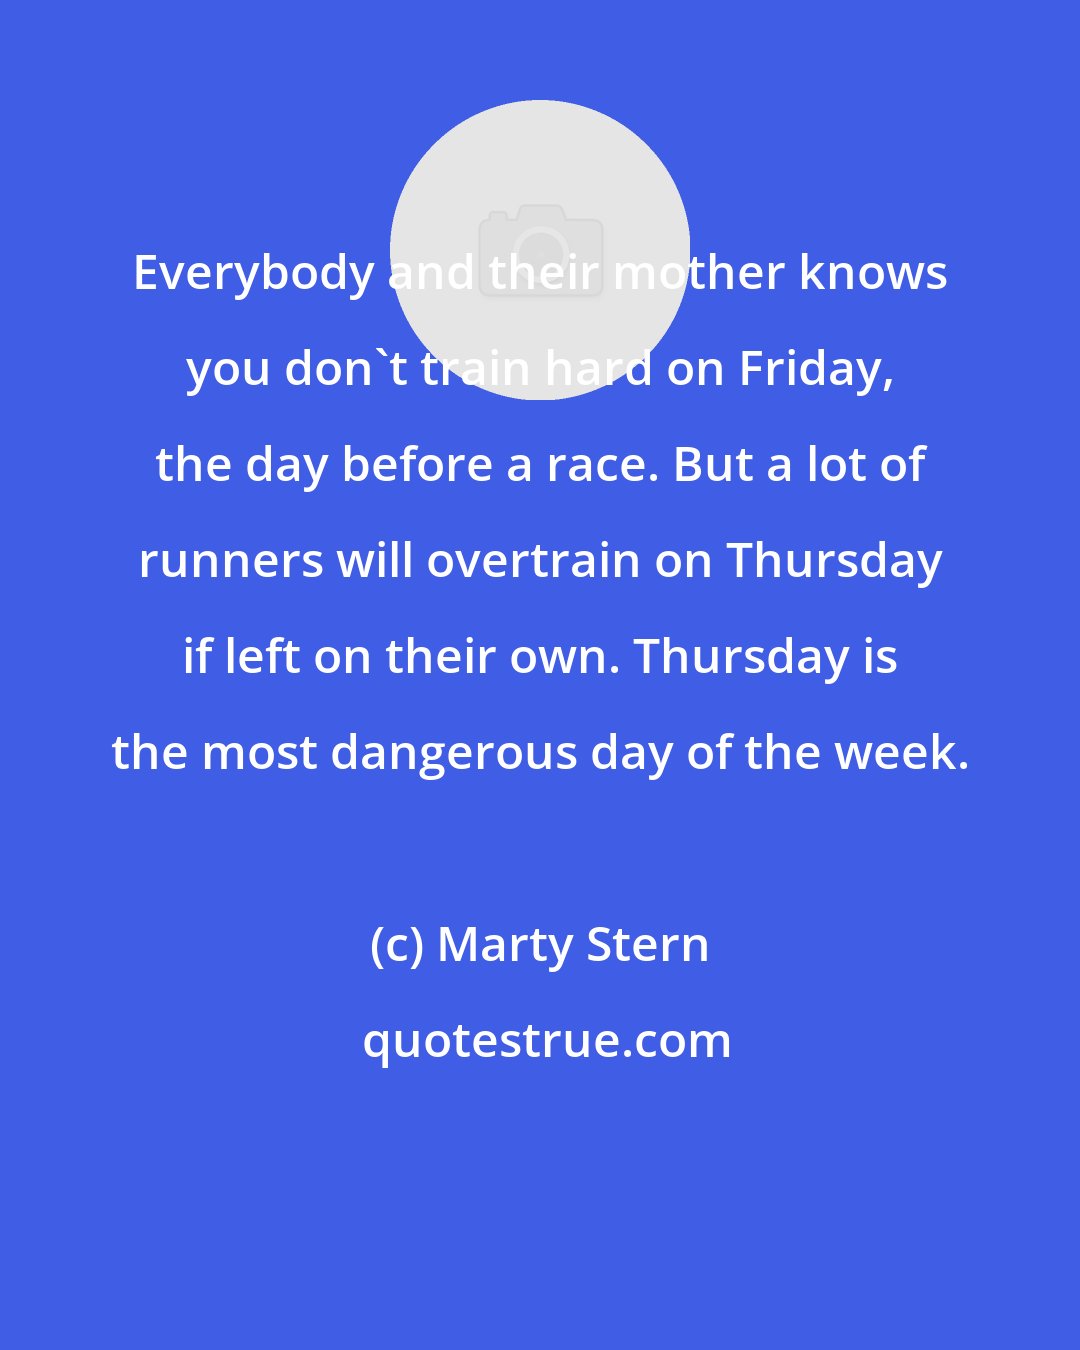 Marty Stern: Everybody and their mother knows you don't train hard on Friday, the day before a race. But a lot of runners will overtrain on Thursday if left on their own. Thursday is the most dangerous day of the week.